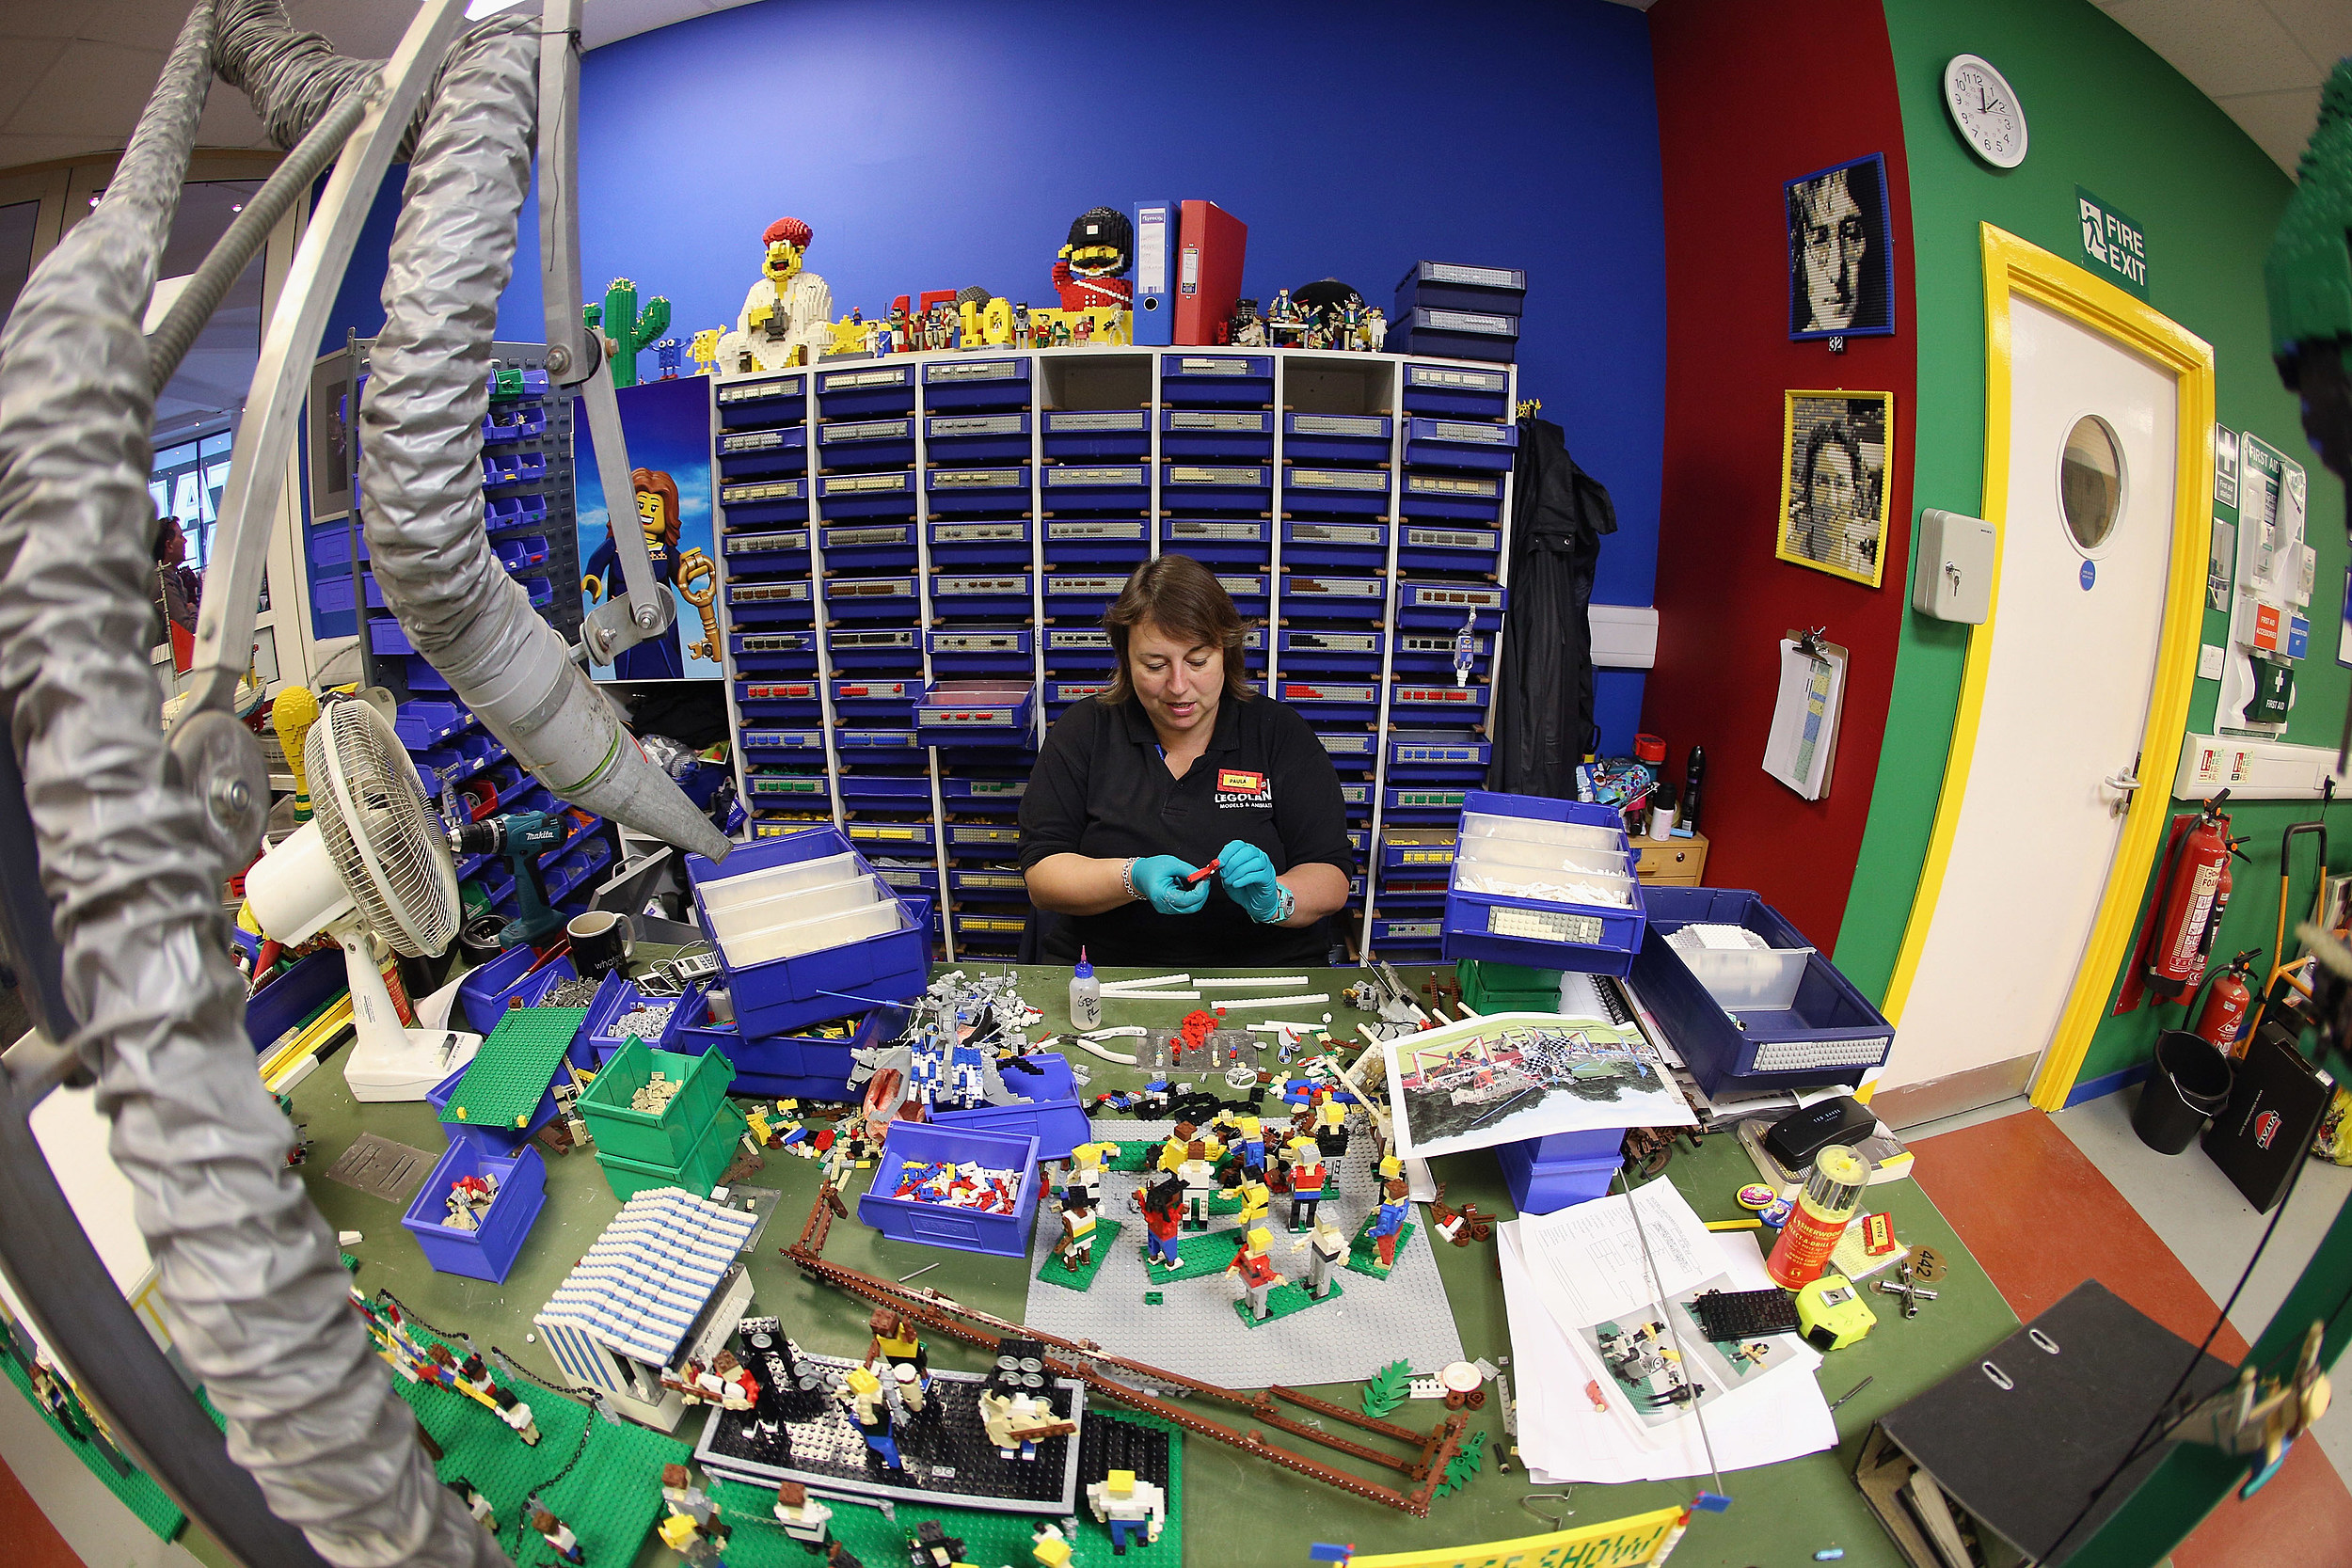 Check Out This 'Simpsons' Springfield Village Made of LEGOs!